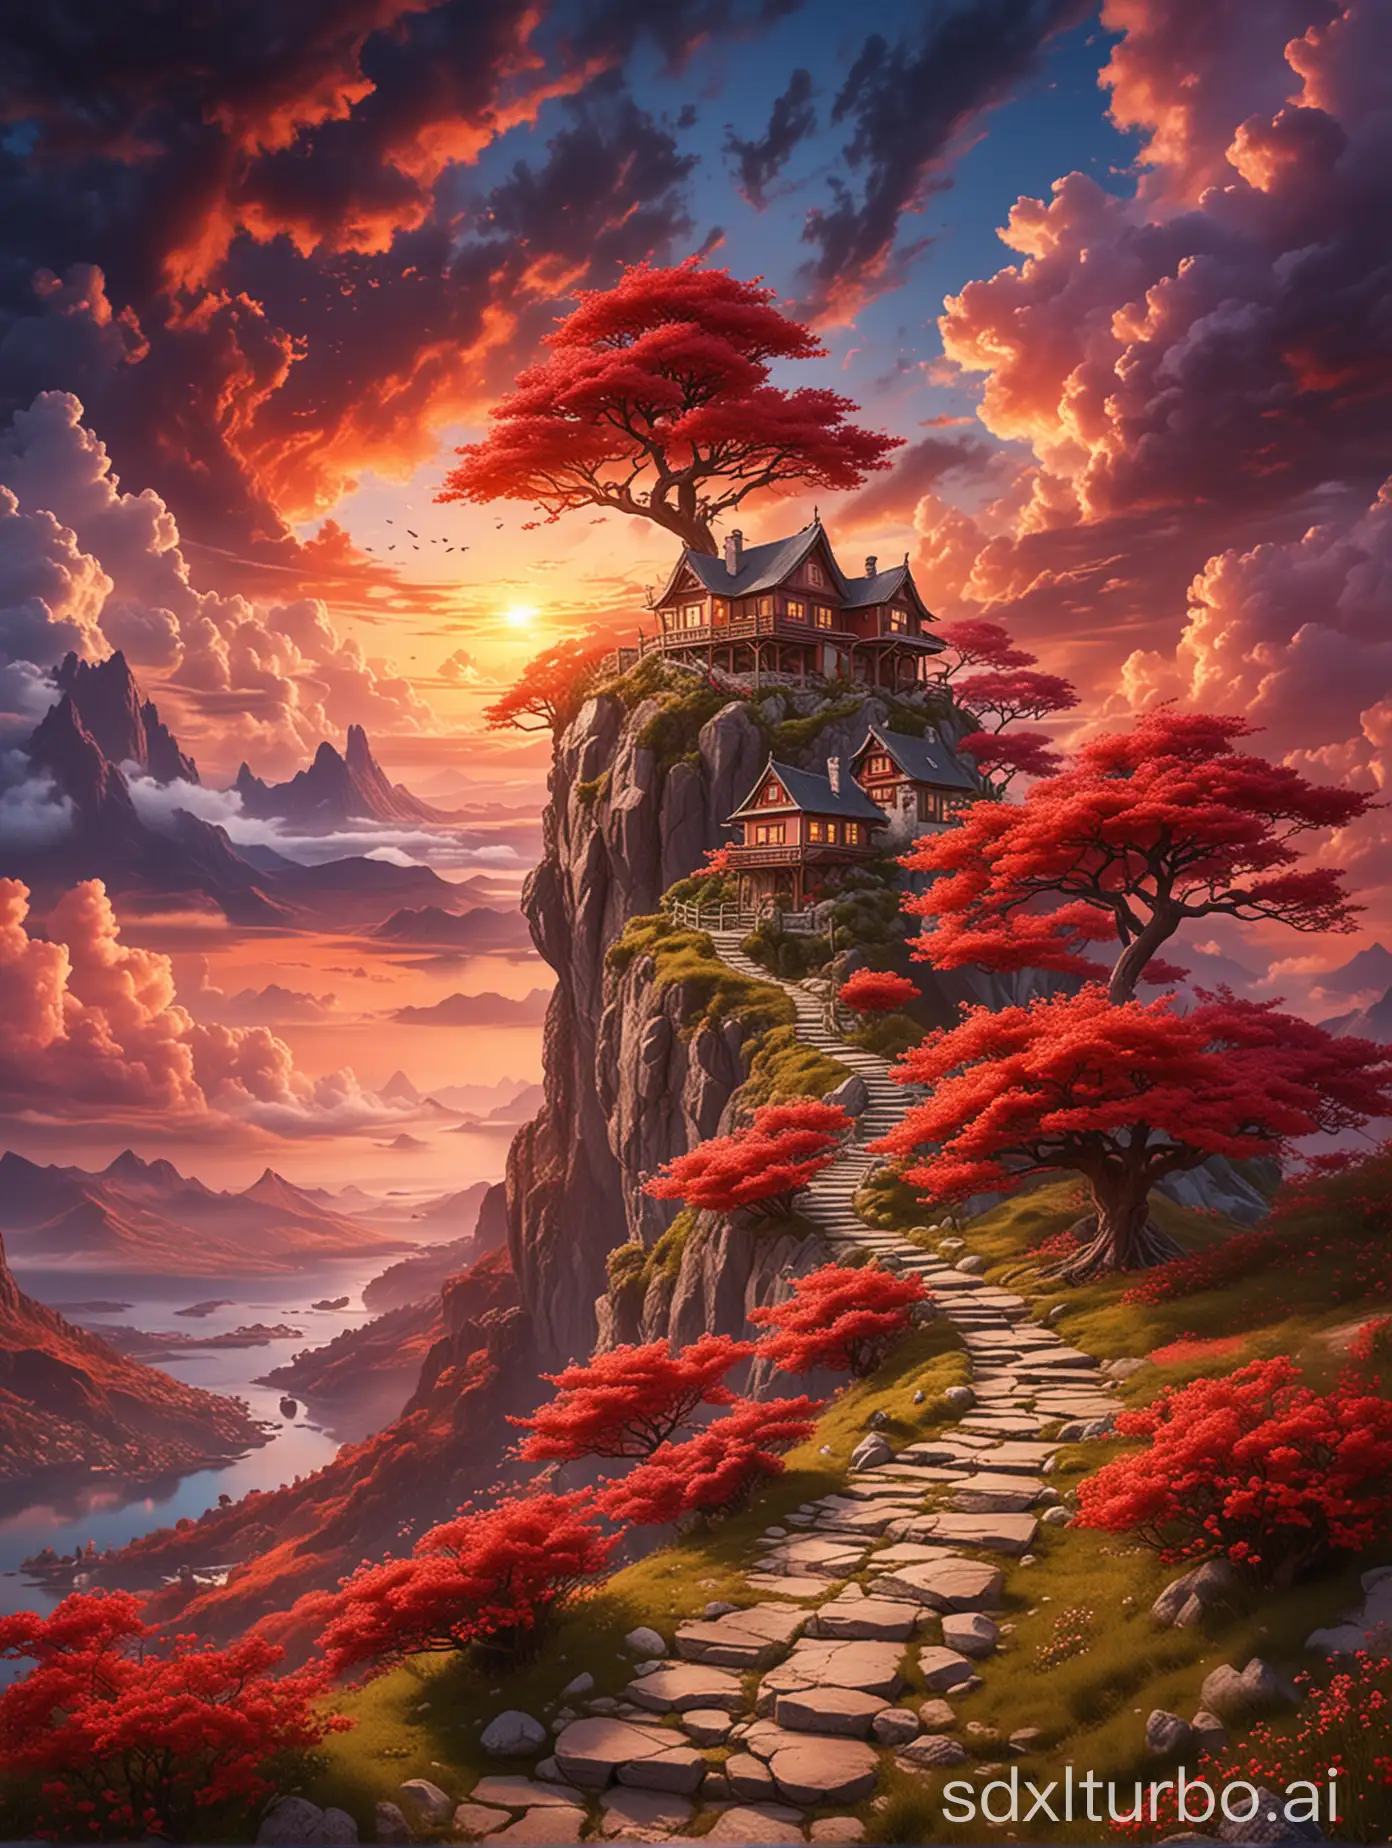 Vibrant fantasy landscape featuring houses on a winding mountain path leading to a floating island with a large red-blossomed tree at the top. The scene is set against a colorful sky with dramatic clouds and a radiant sunset.